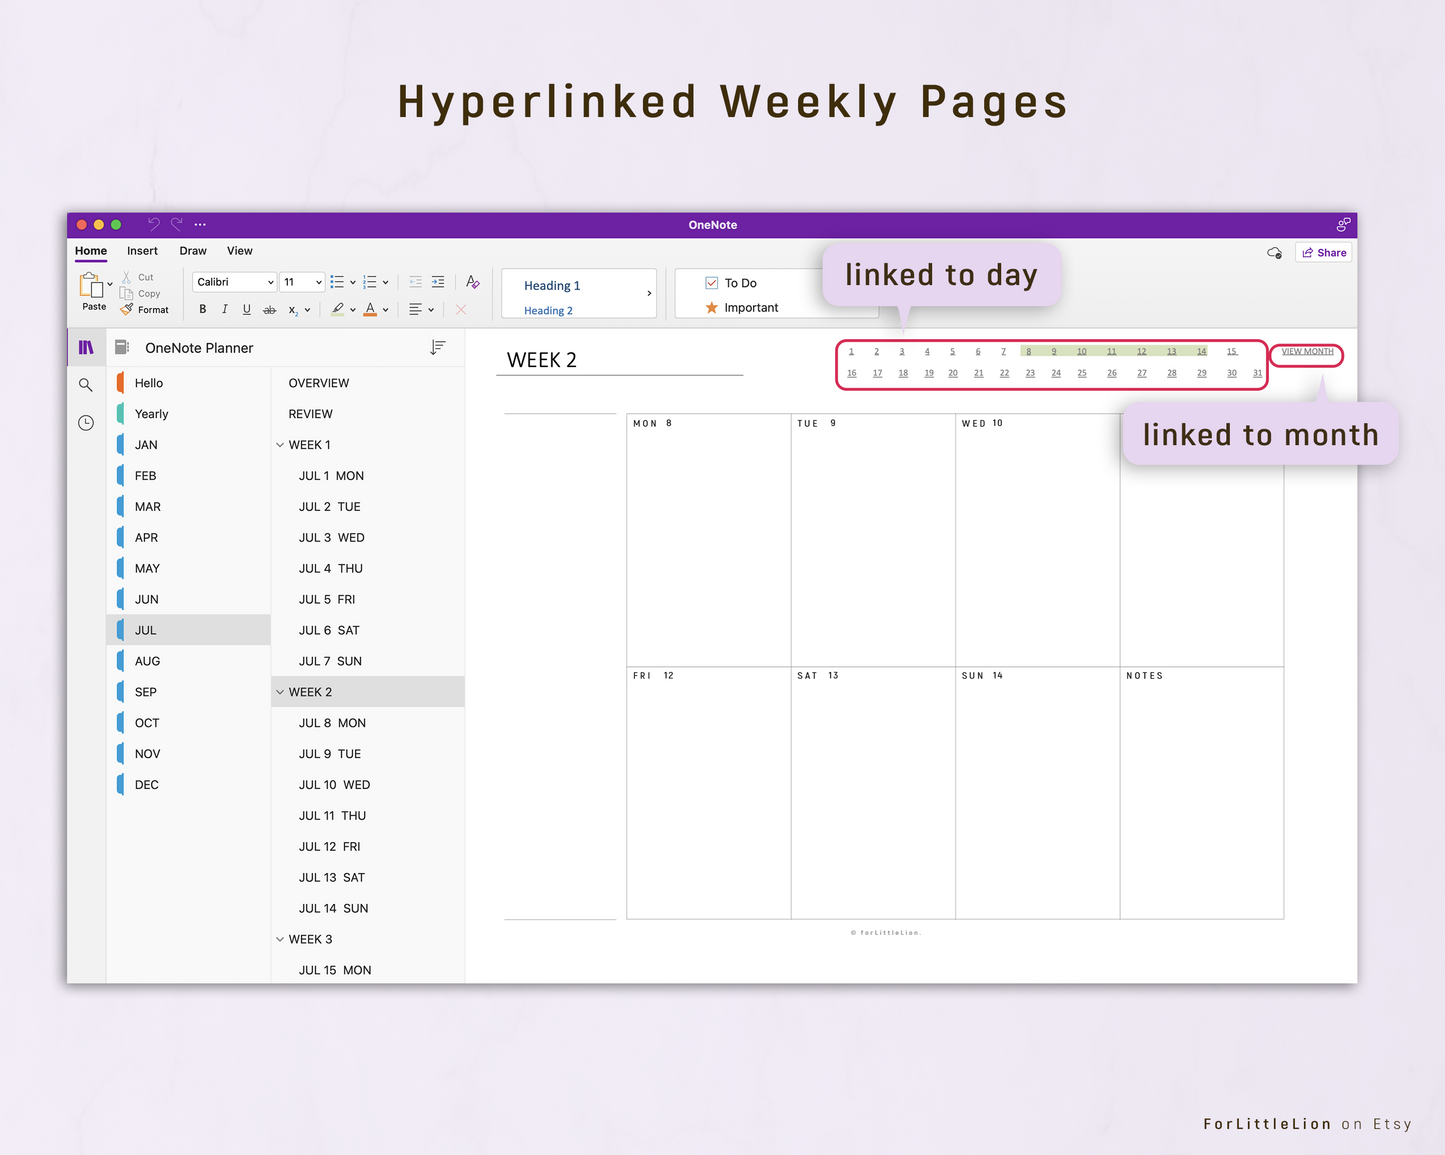 2024 Ultimate OneNote Planner w/ Blank Daily Pages